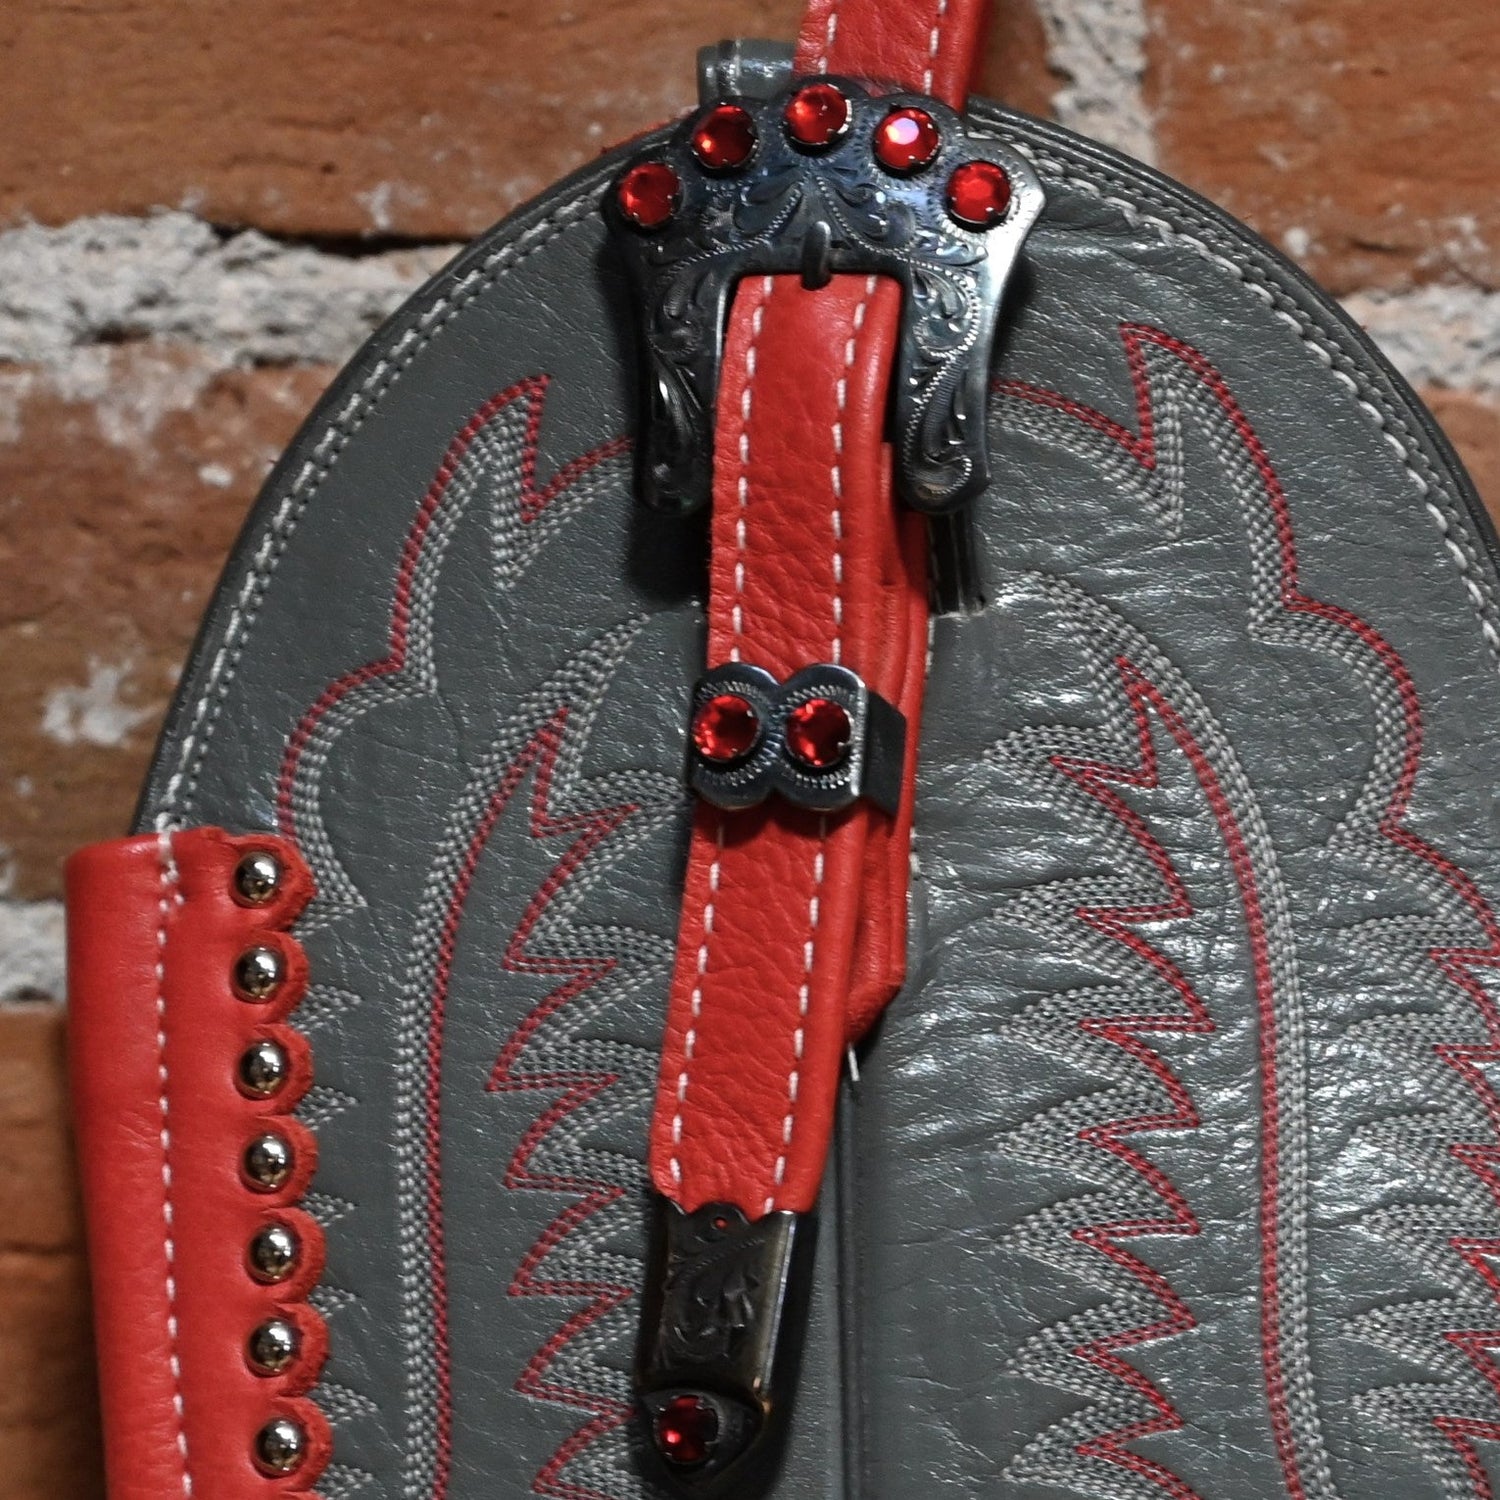 Purse- Cowboy Boot Top w/ buckles- red and gray close up view